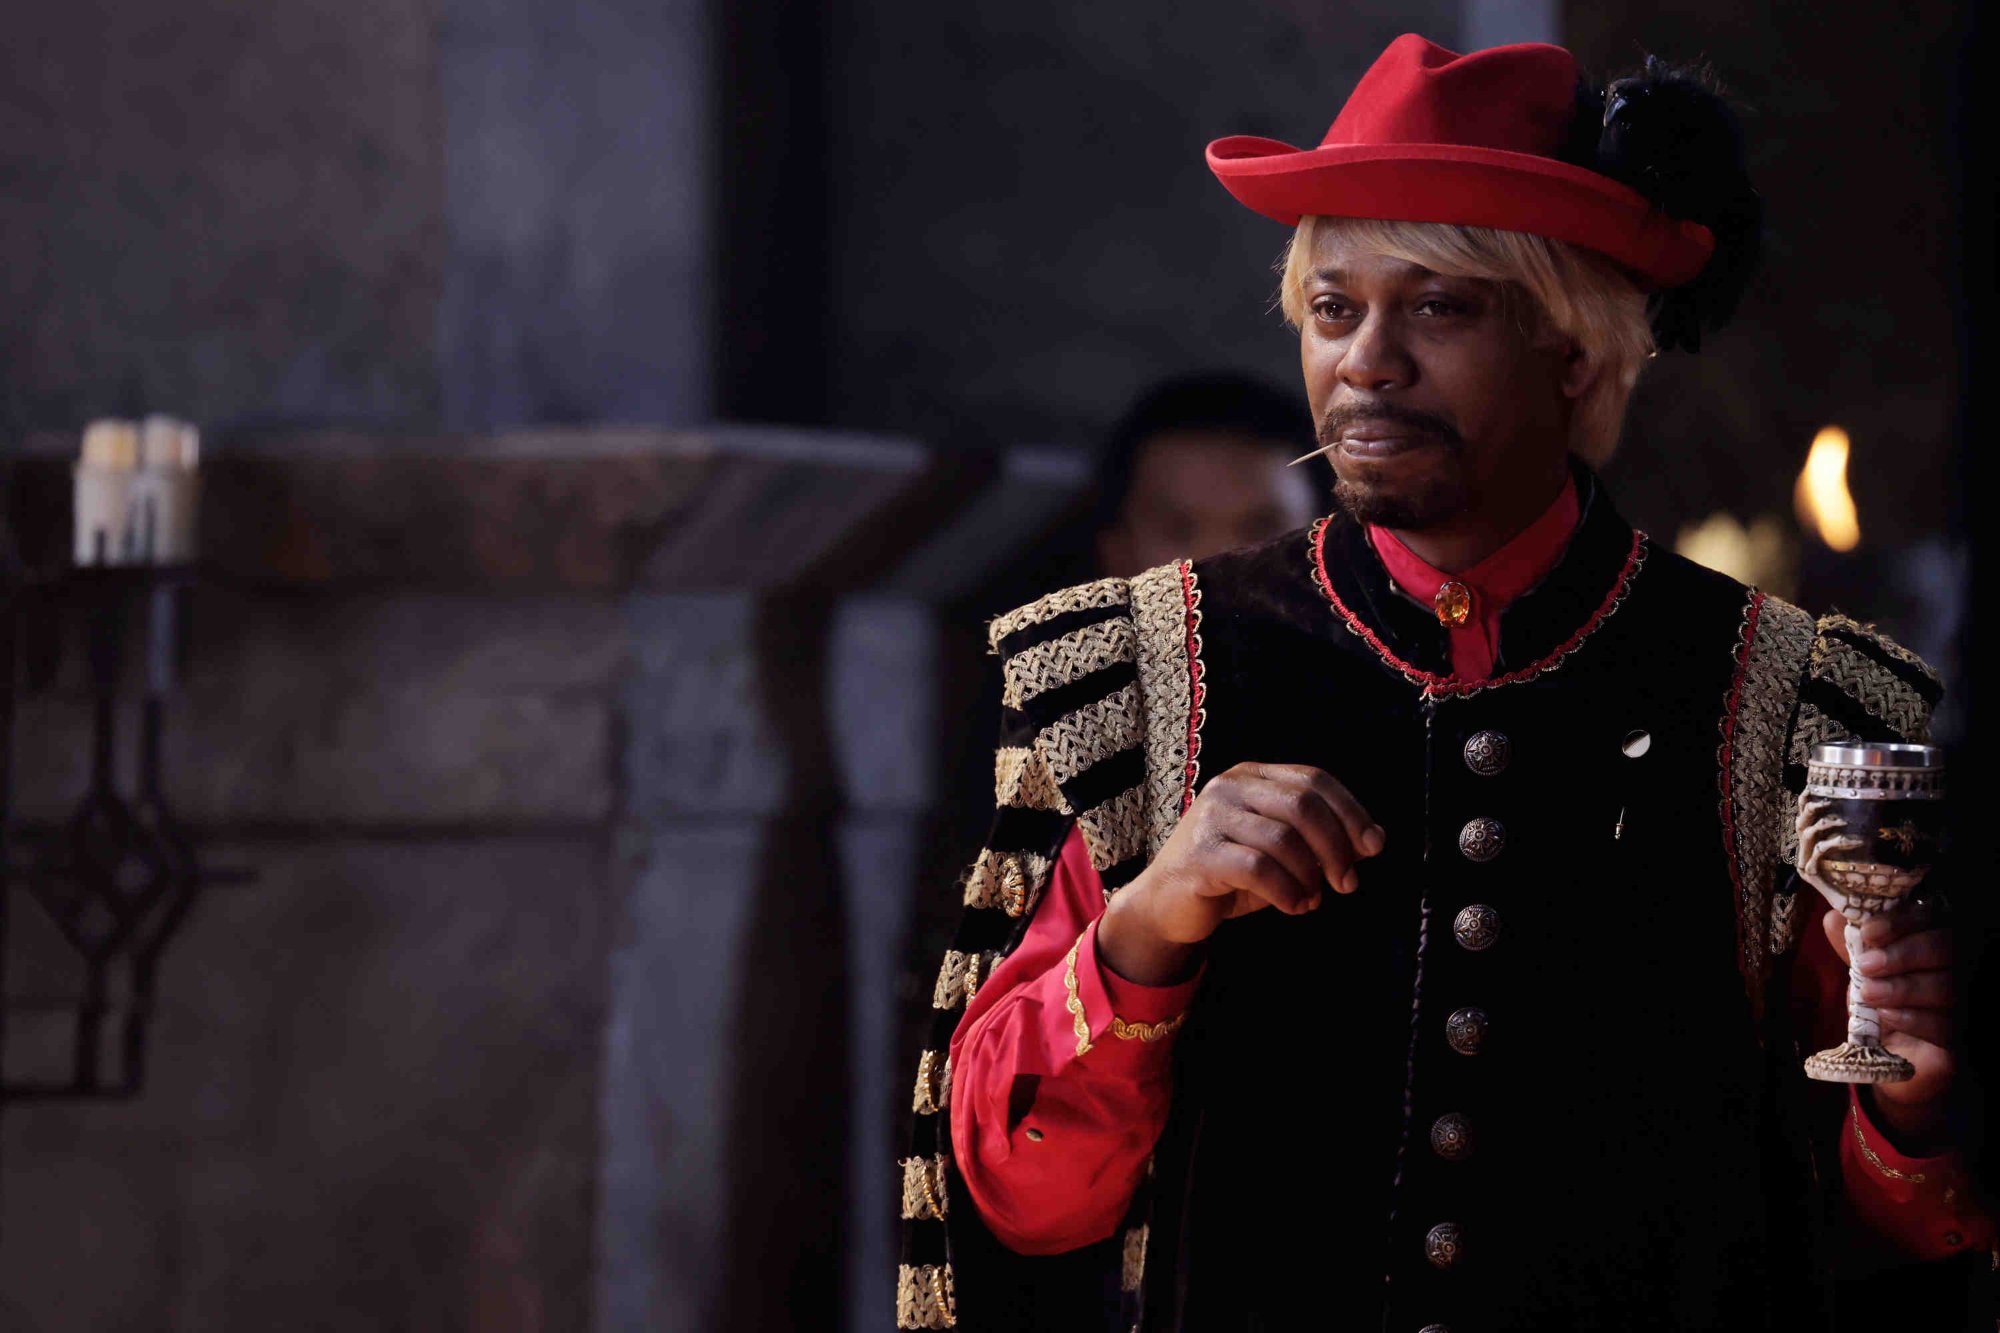 'Saturday Night Live' host Dave Chappelle wearing a red hat, black vest, and red sleeves.